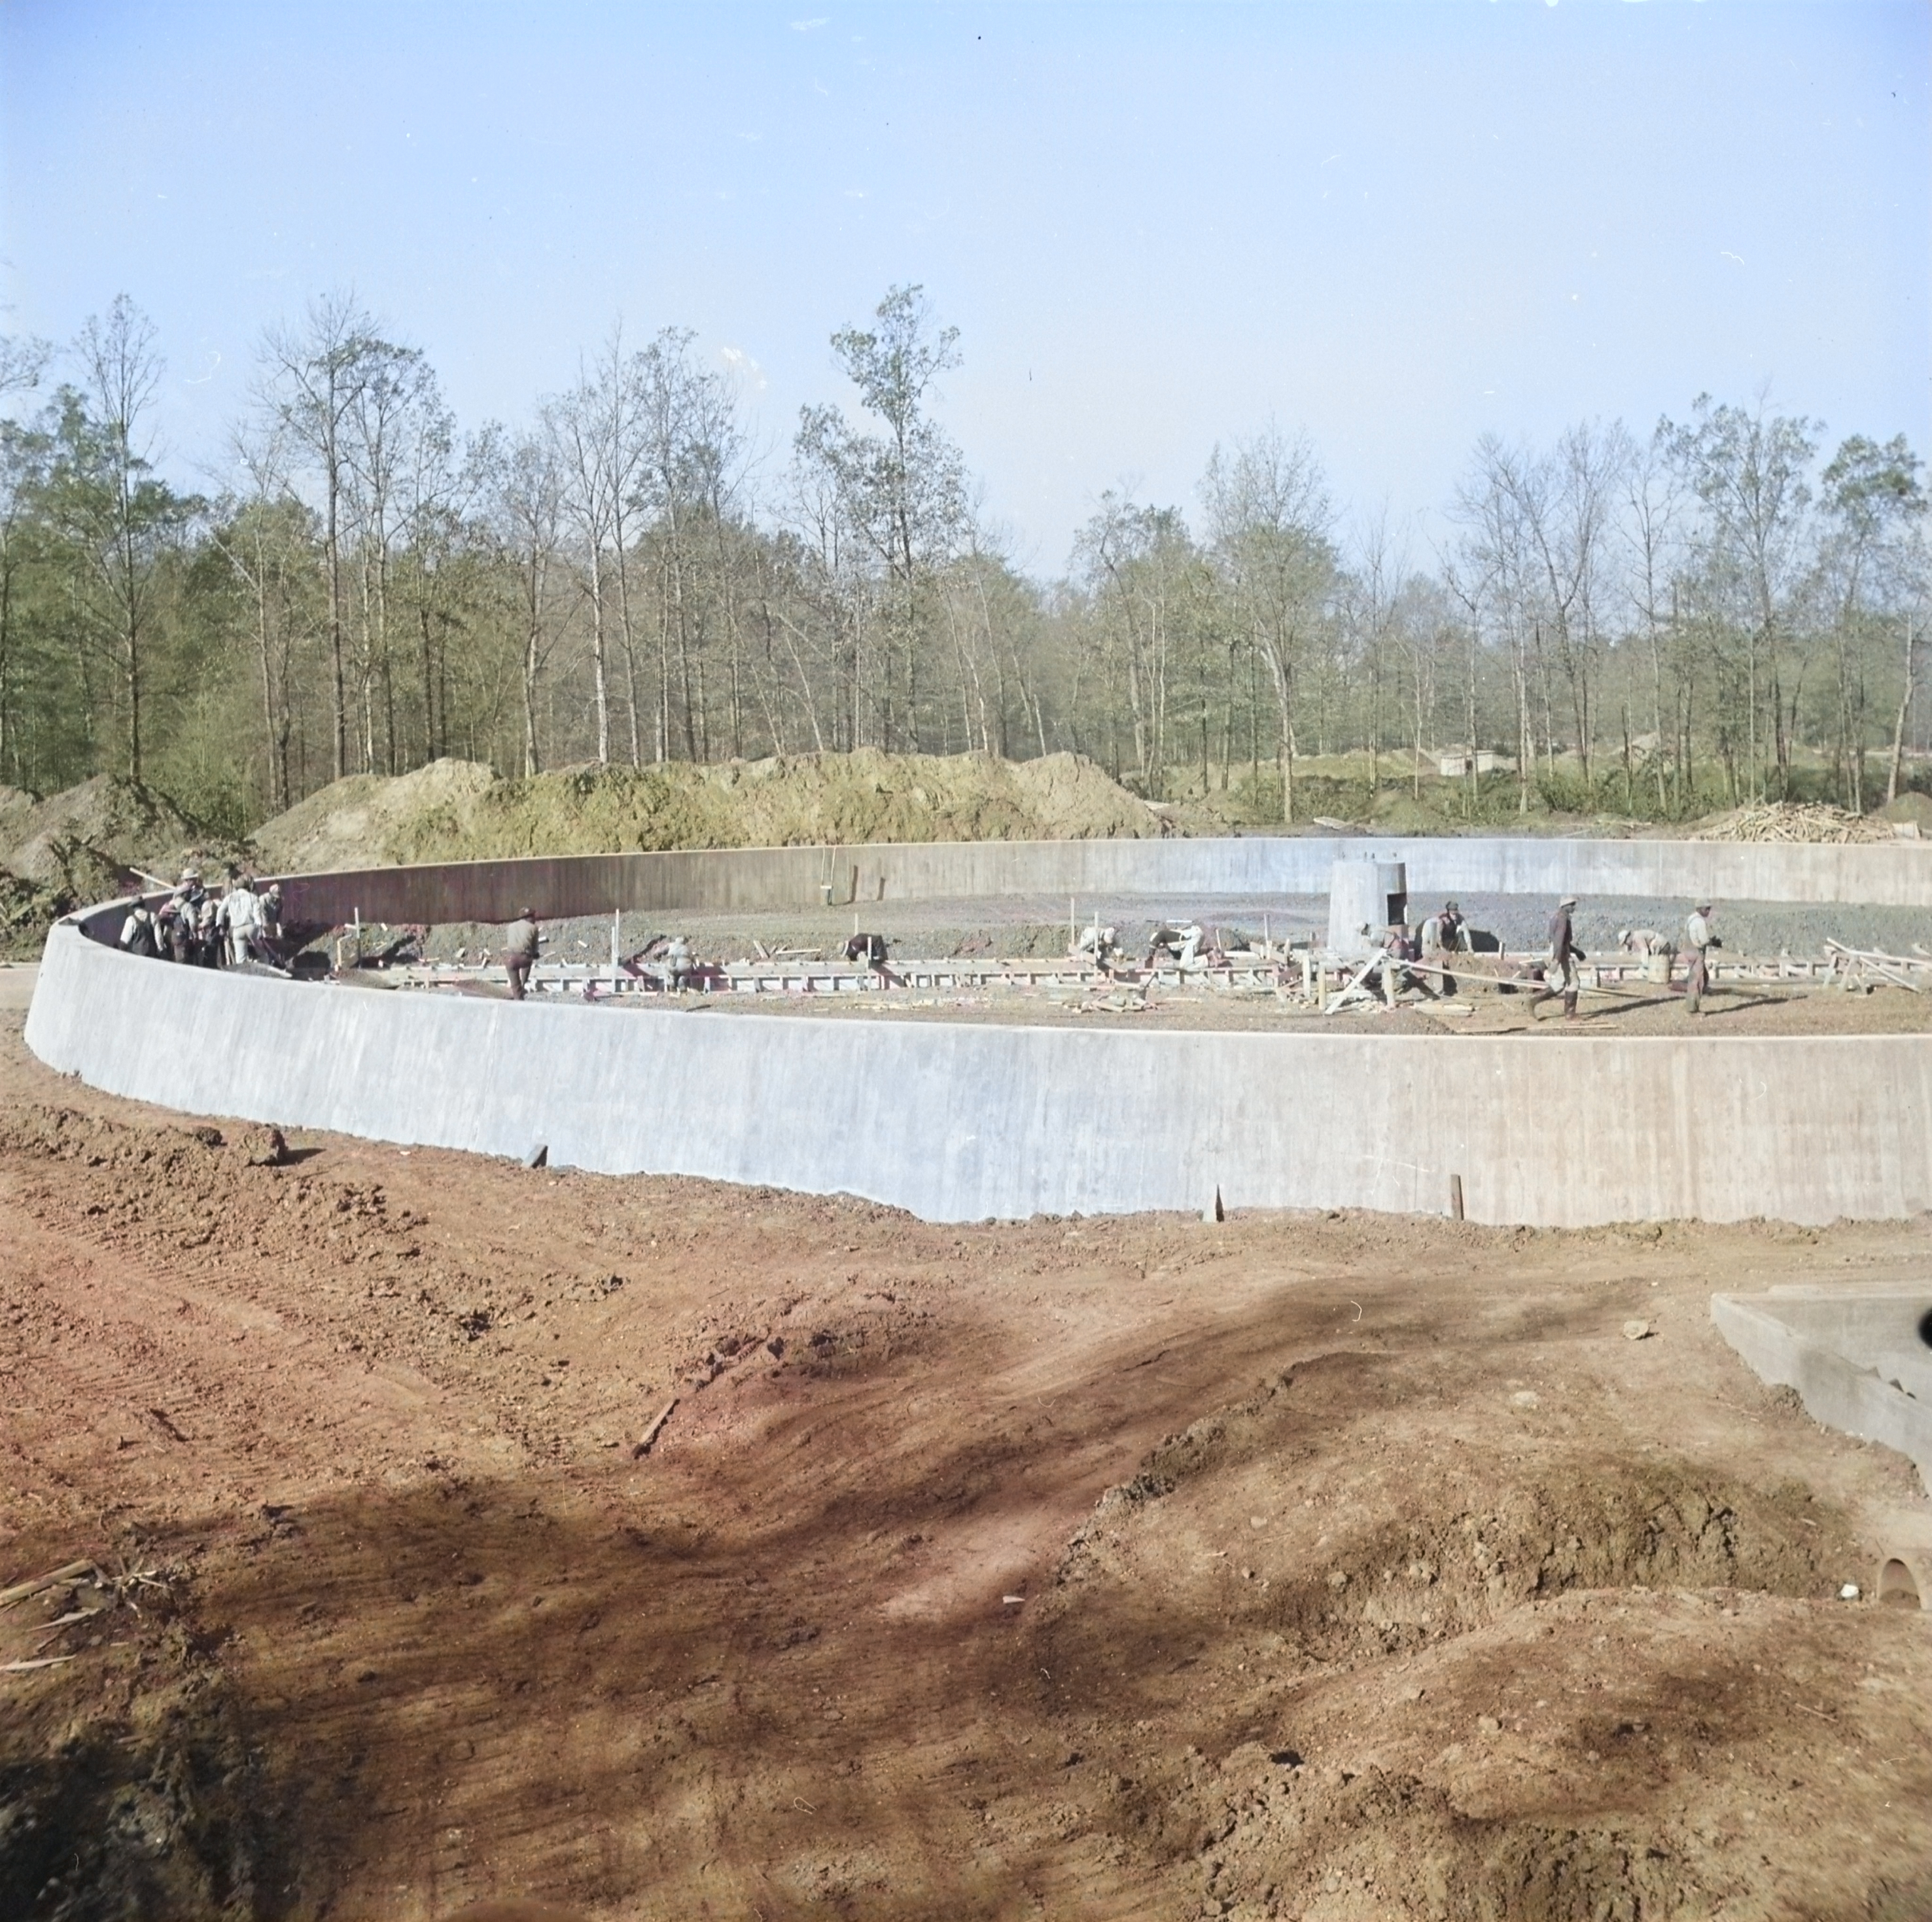 Construction of the sewage disposal plant at Jerome War Relocation Center, Arkansas, United States, 14 Nov 1942, photo 5 of 5 [Colorized by WW2DB]